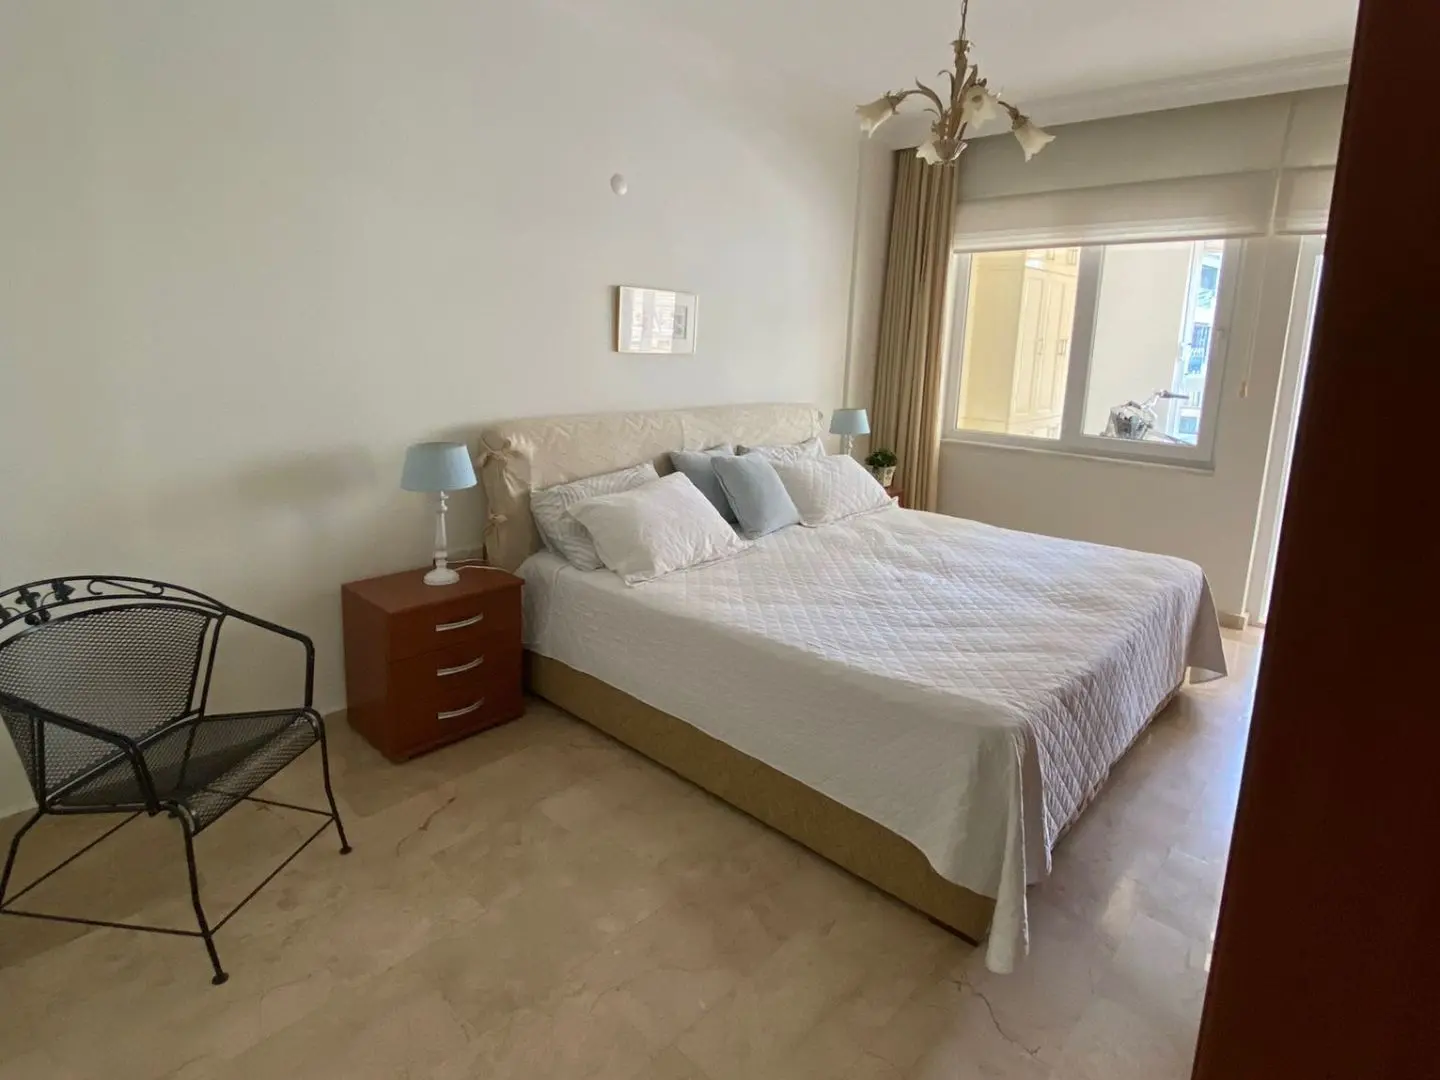 SPACIOUS 2+1 FLAT ONLY 200 M TO THE SEA IN MAHMUTLAR, ALANYA